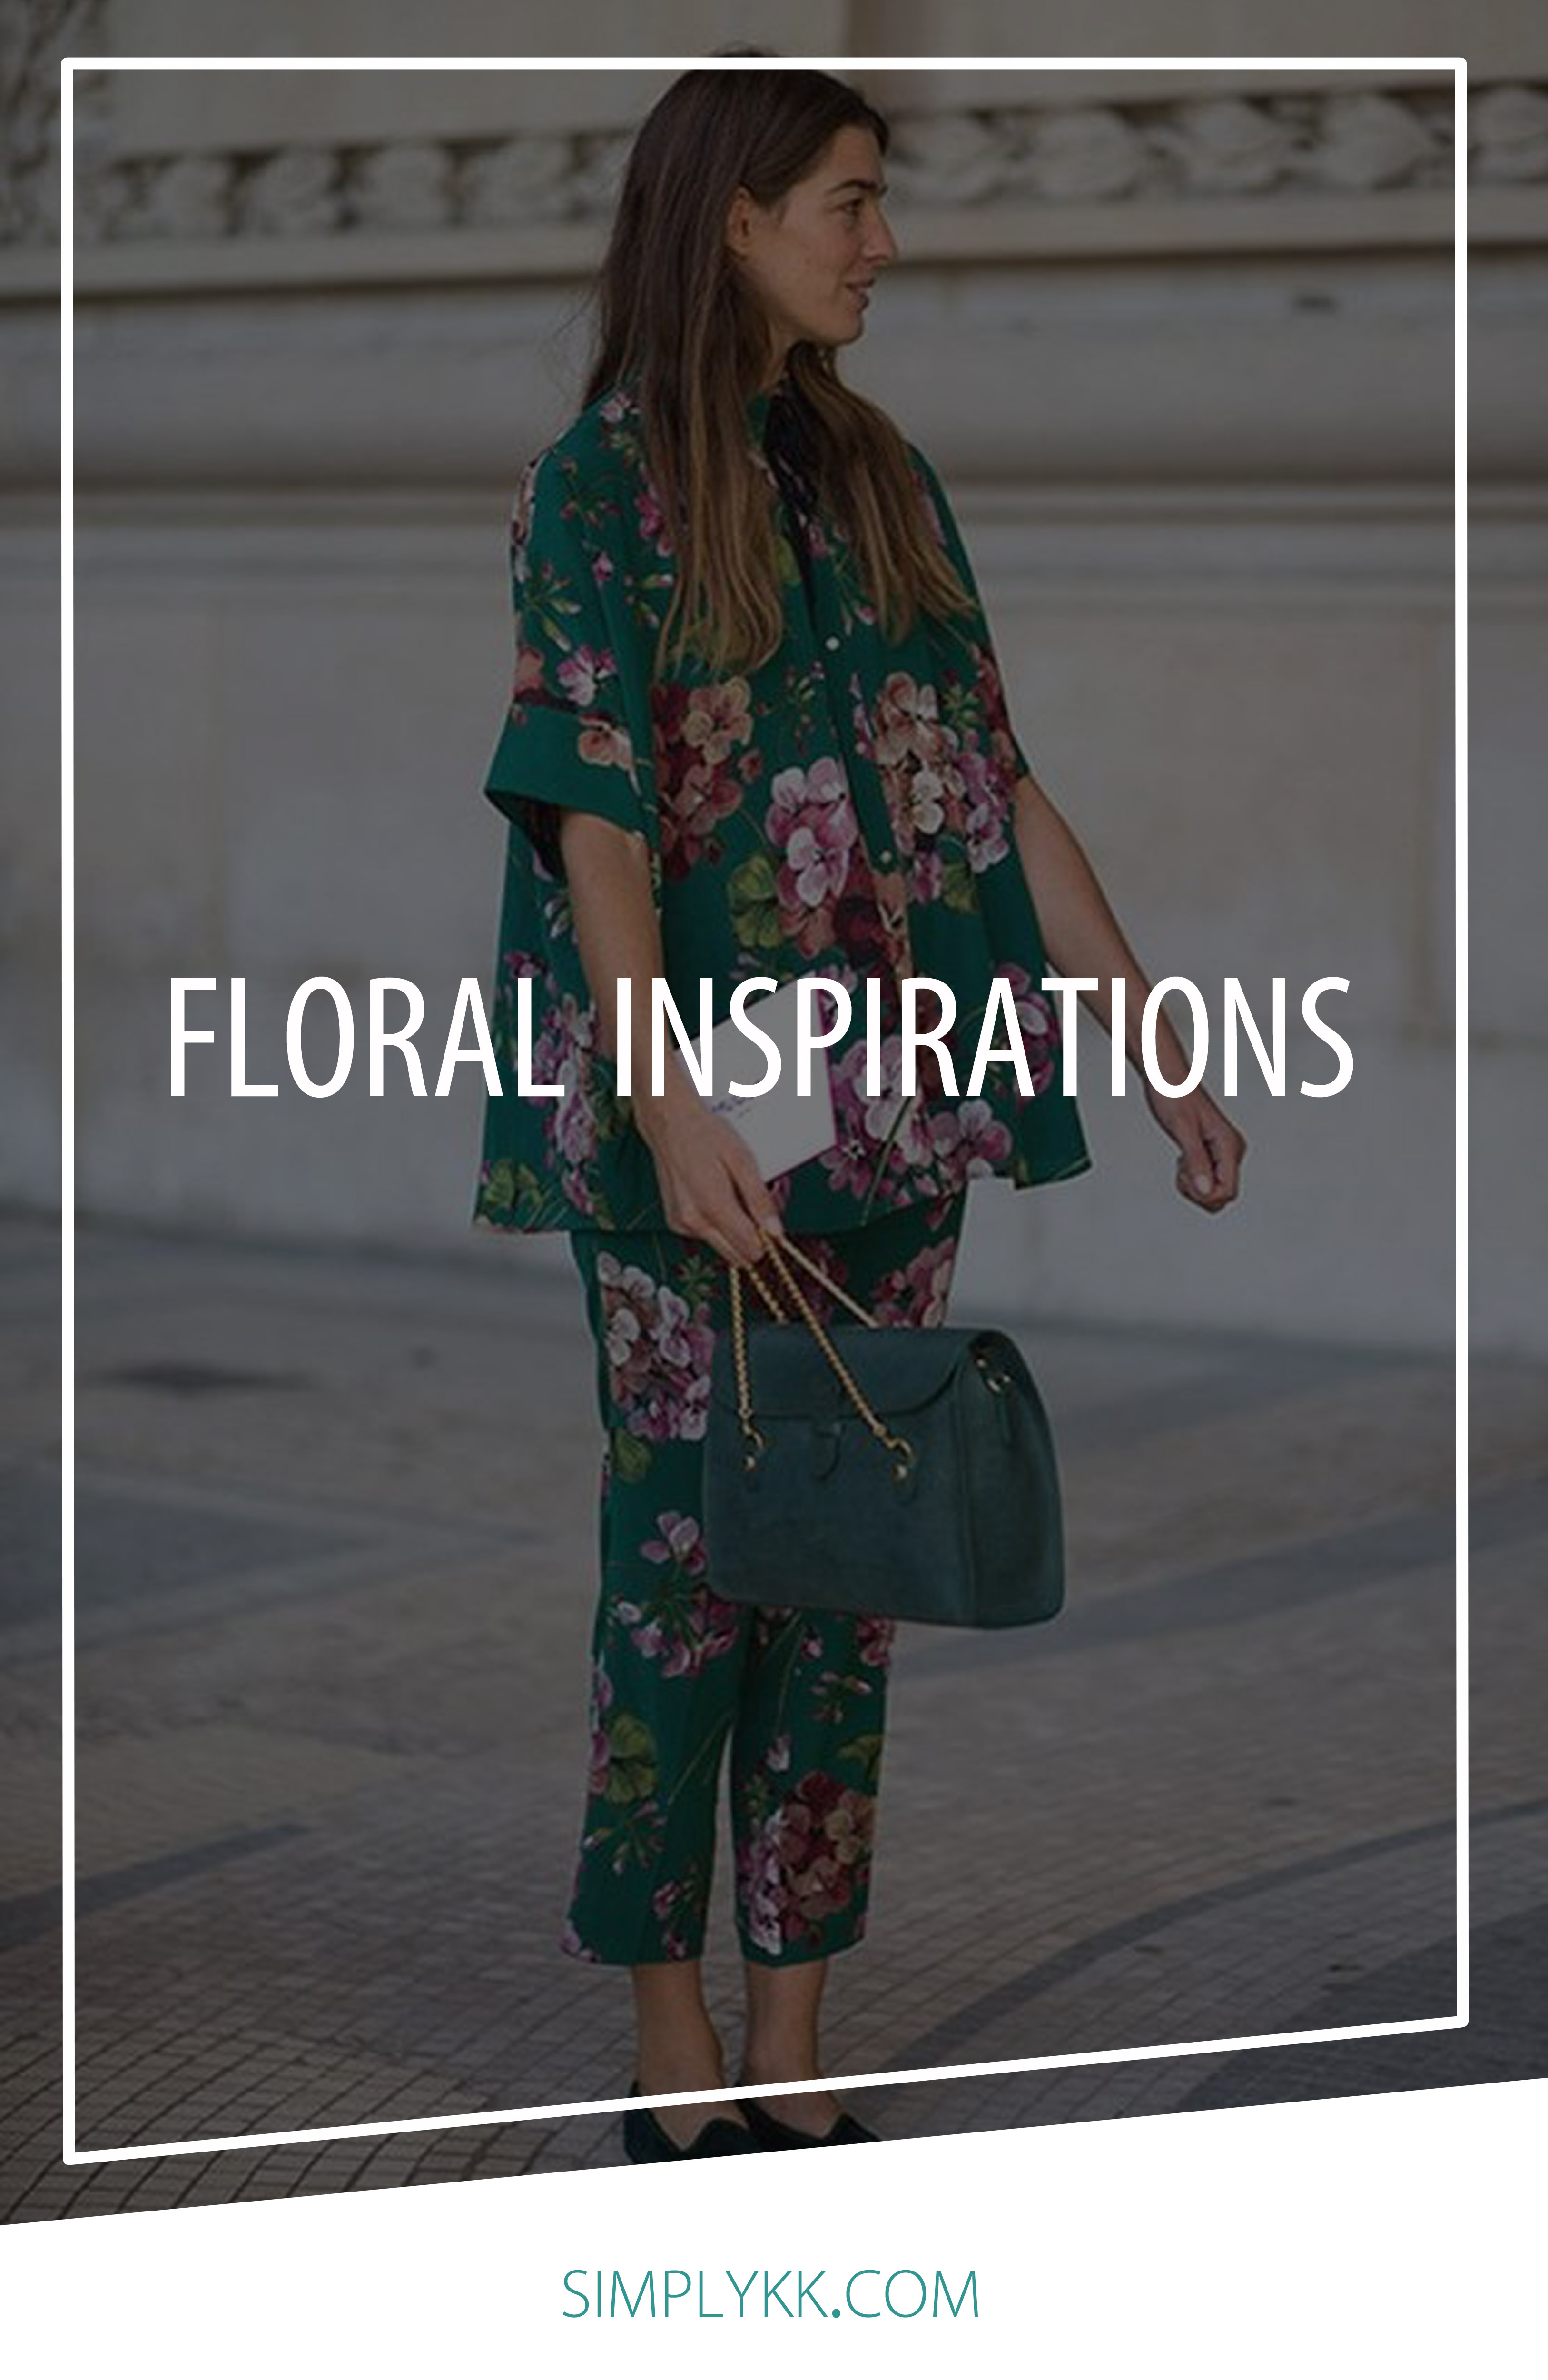 Incorporate floral into your spring looks | Simply KK